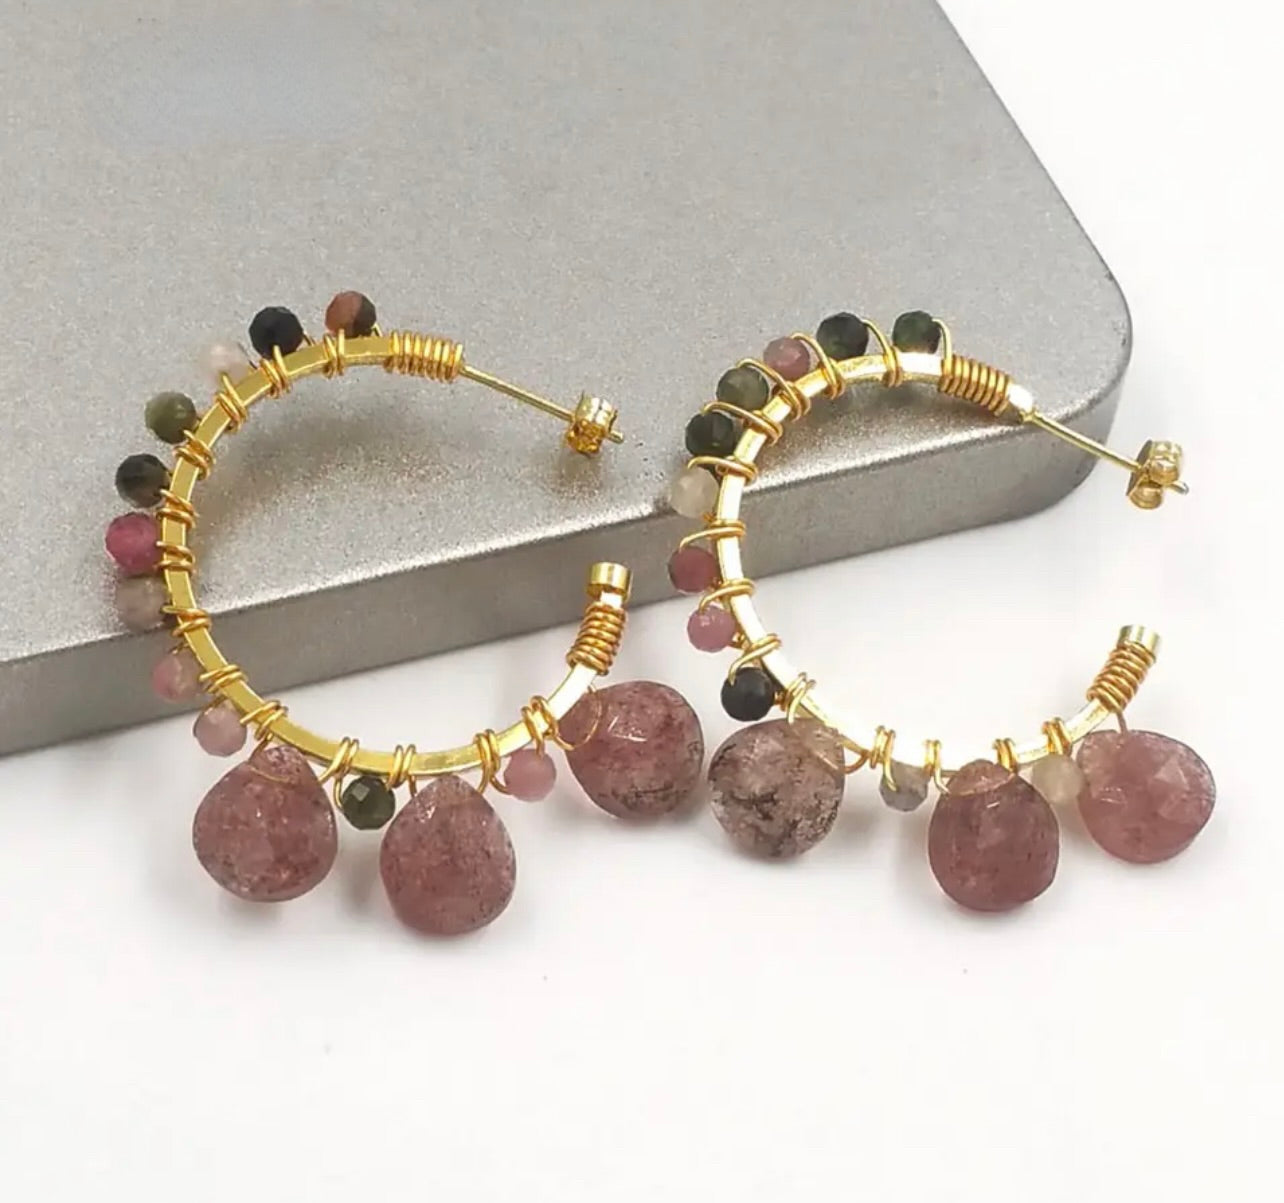 Stainless steel Hoops with Faceted Tourmaline and Teardrop Gemstones